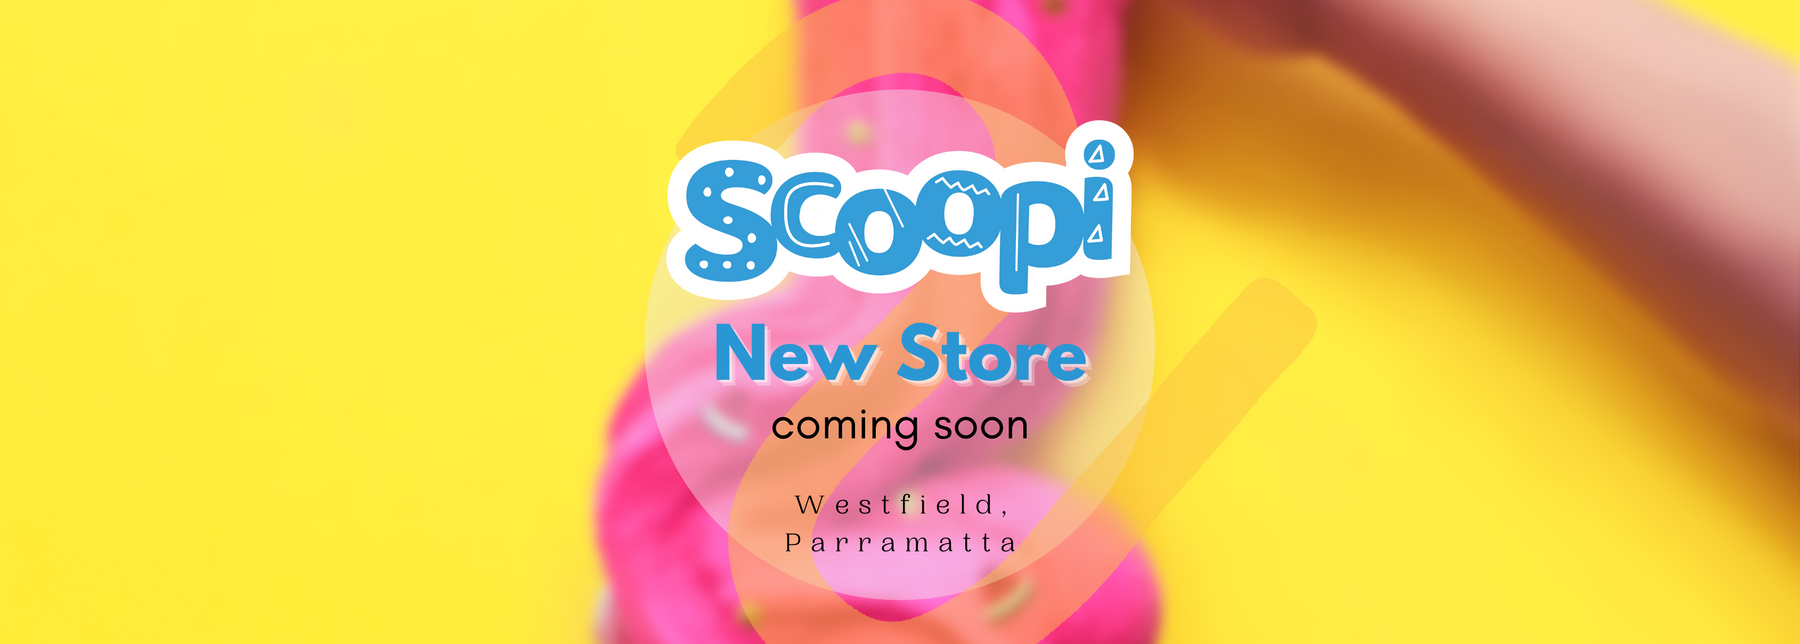 We're Opening a New Store in Parramatta, Westfield!